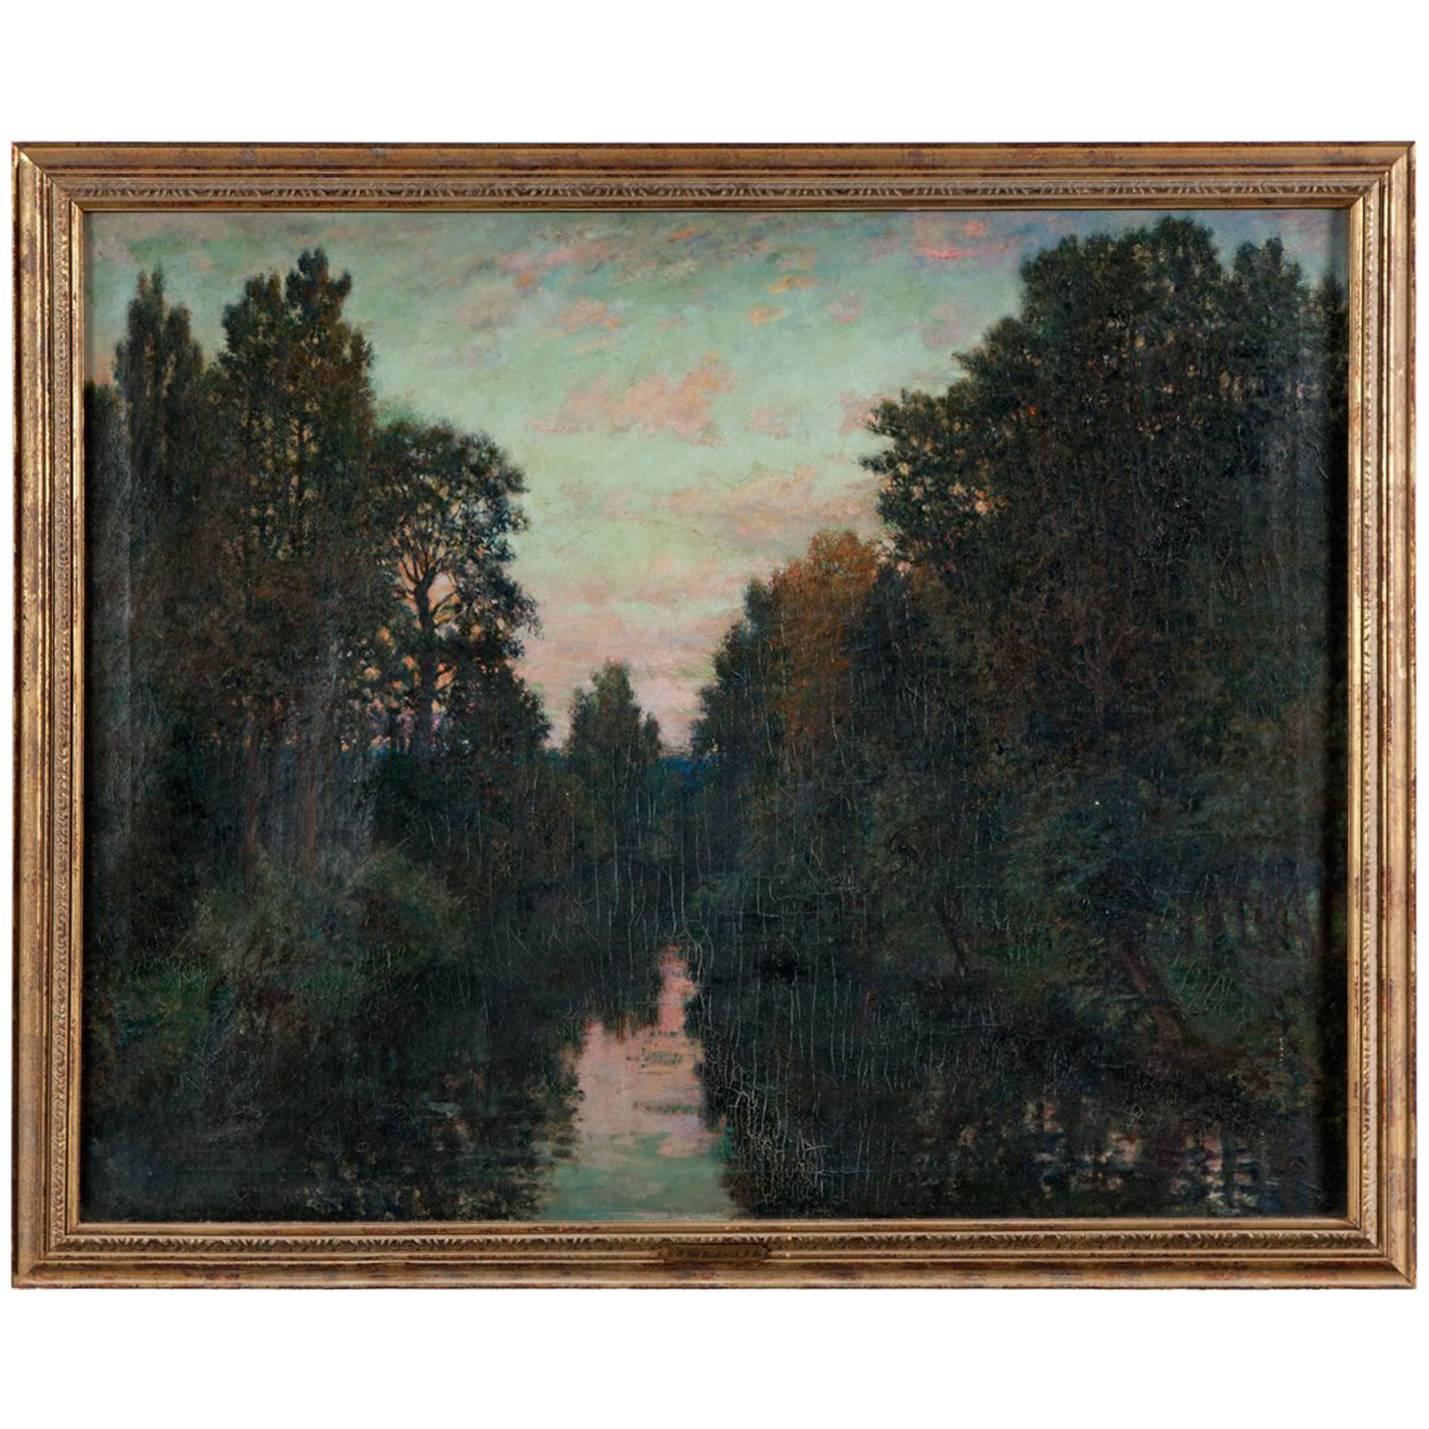 Antique 'Twilight on the River' Oil on Canvas by Artist Robert Ward Van Boskerck For Sale